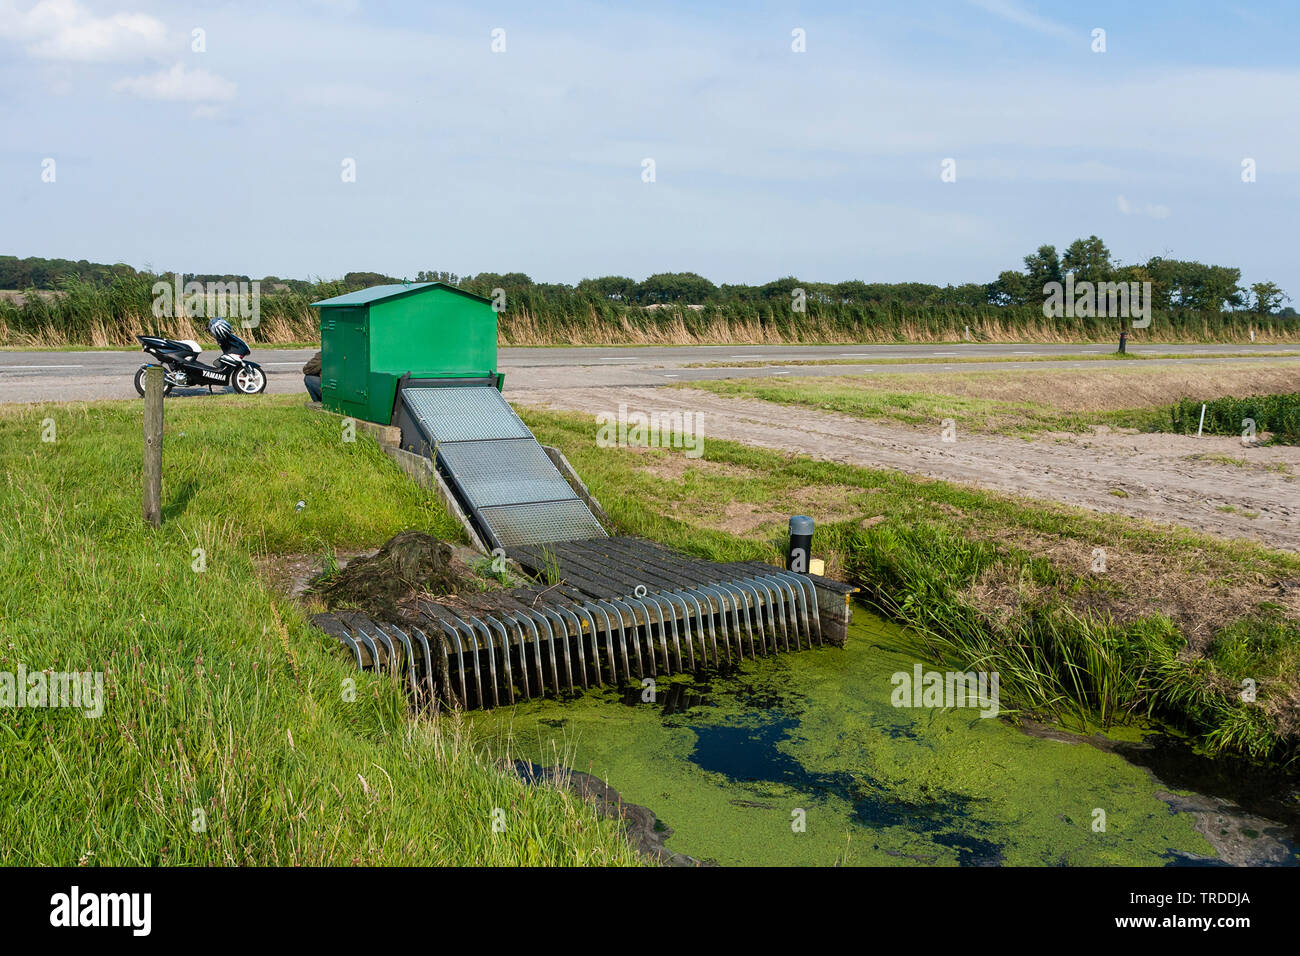 Water pumping station at ditch covered by duckweed, Netherlands, Frisia, Warkumerwaard Stock Photo